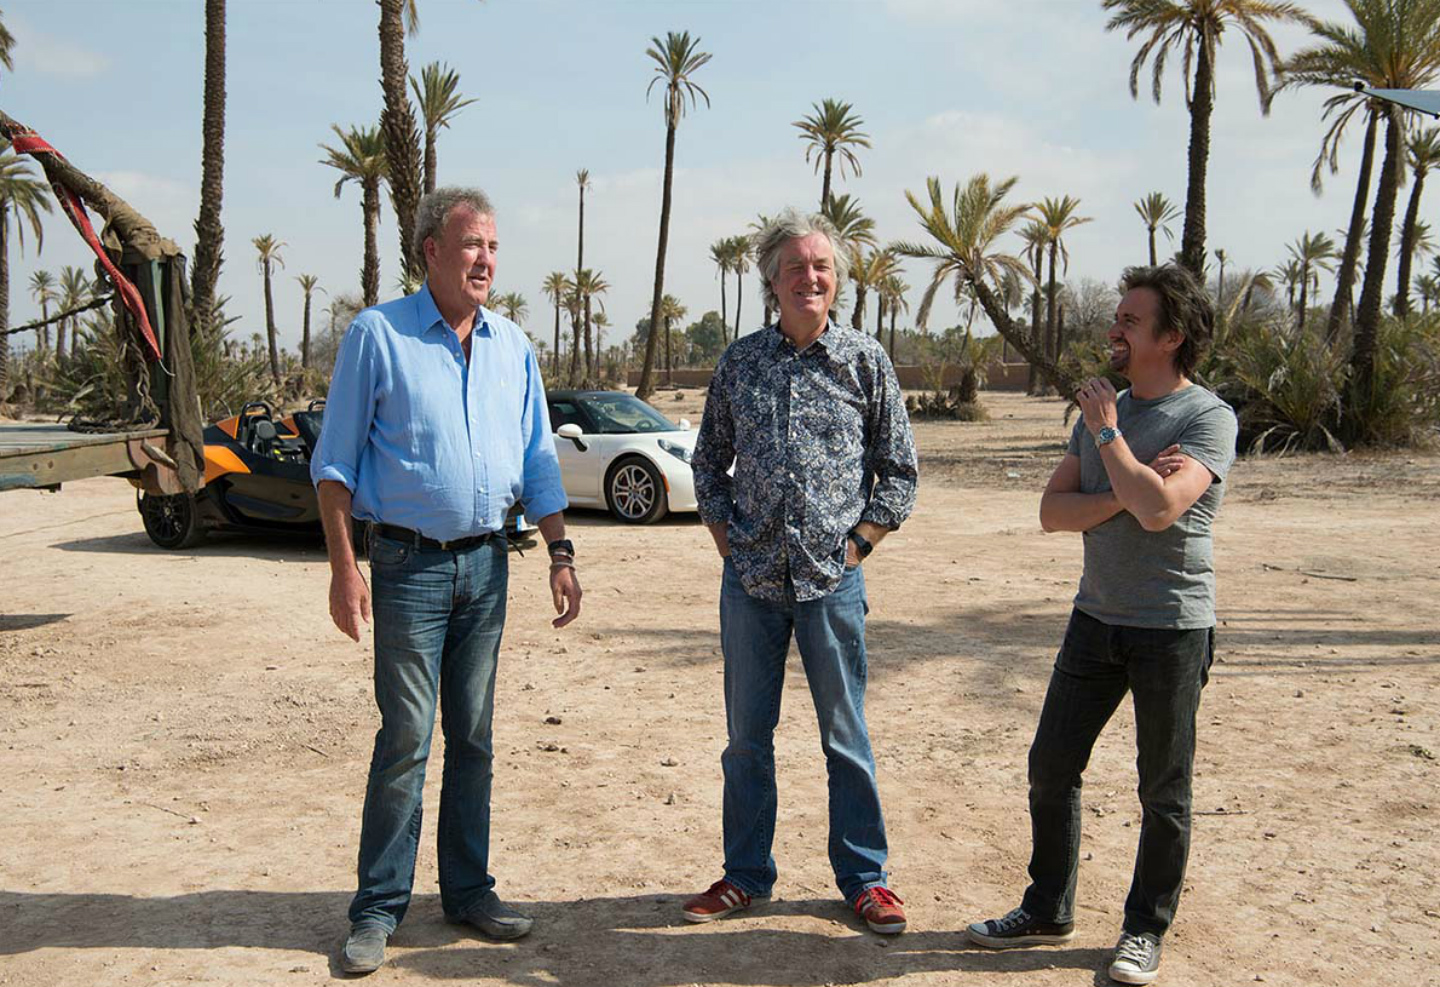 Video preview: The Grand Tour is coming. What could possibly go wrong?